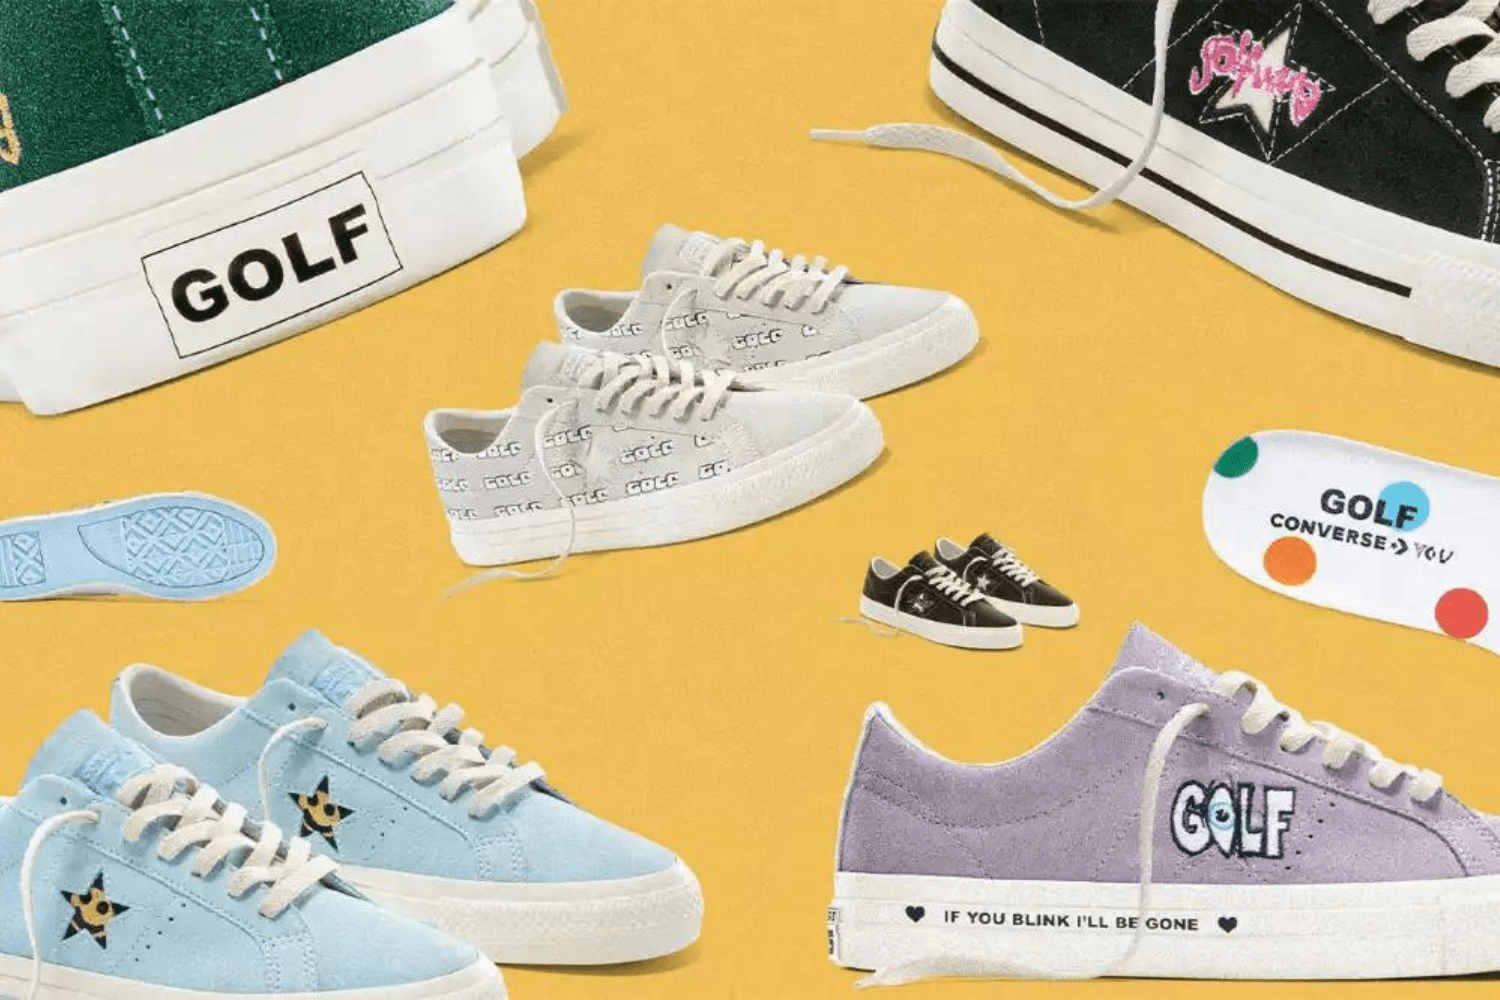 Personalisiere den Converse One Star Pro By You im GOLF WANG Stil